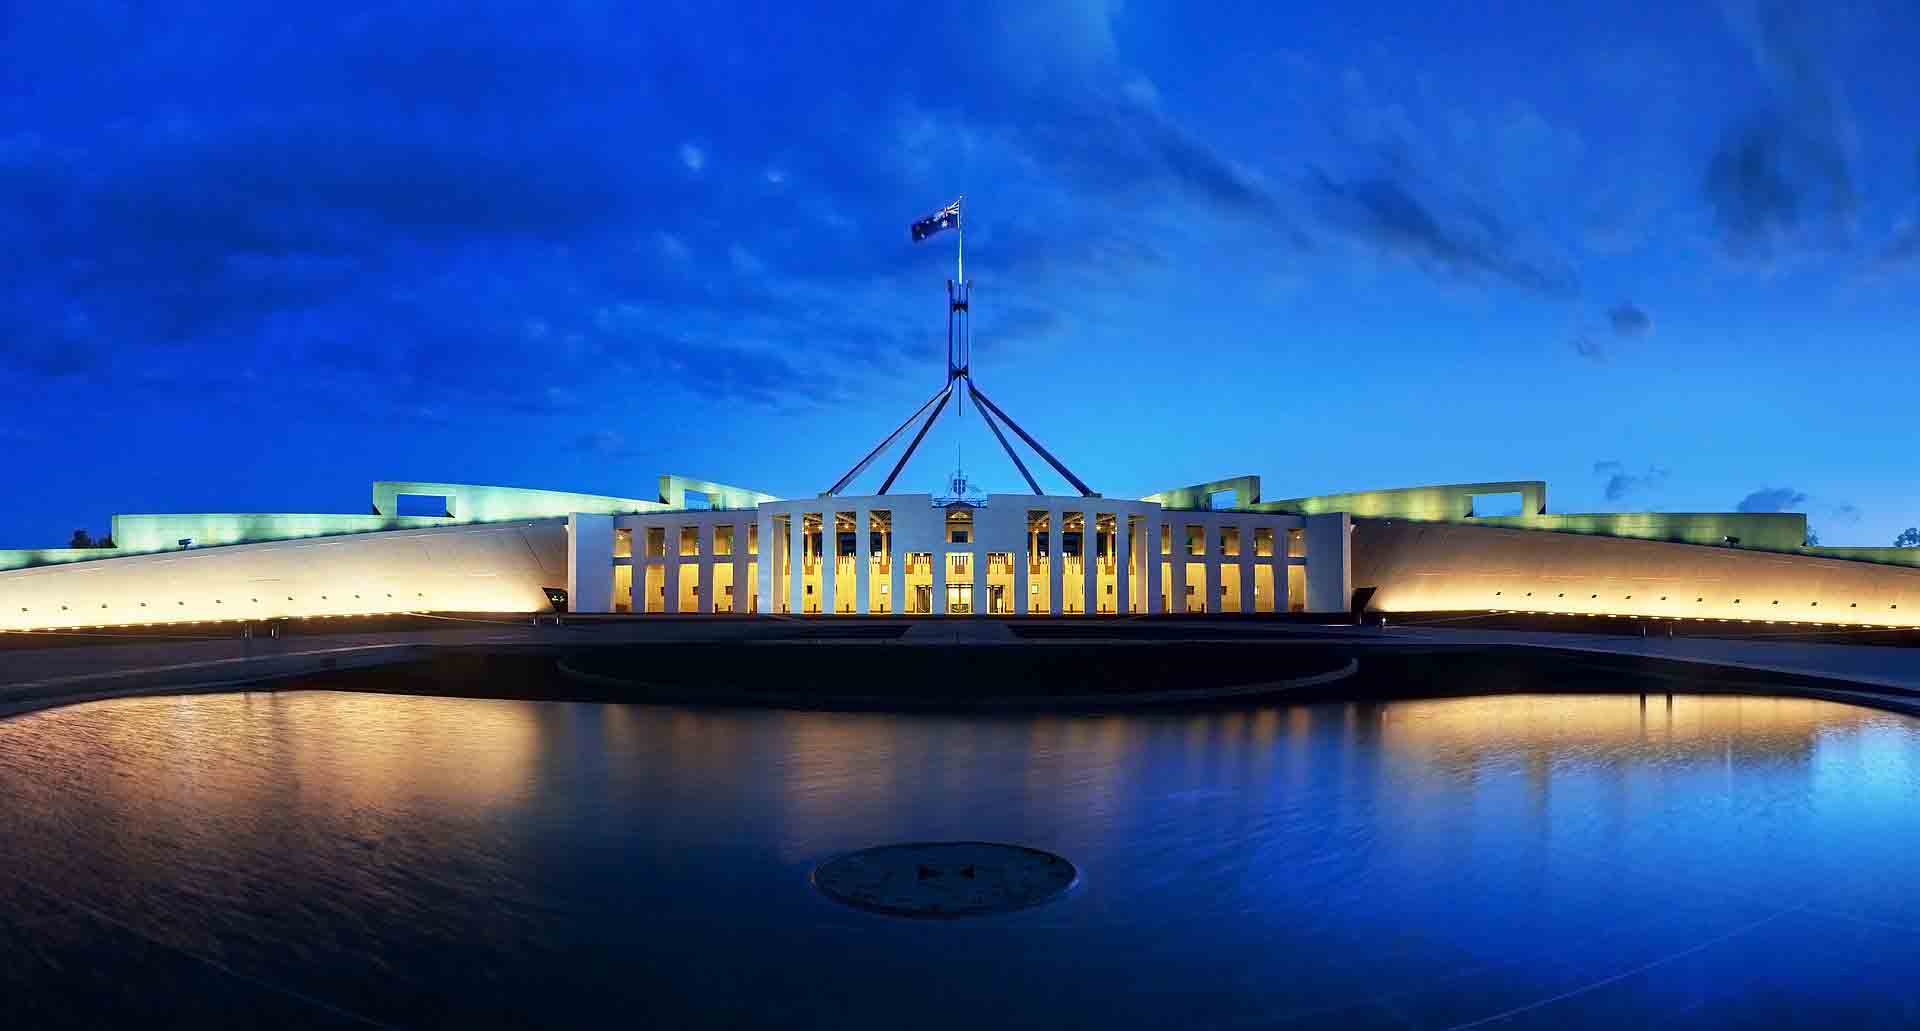 Panoramic shot of an Australian official building in the evening